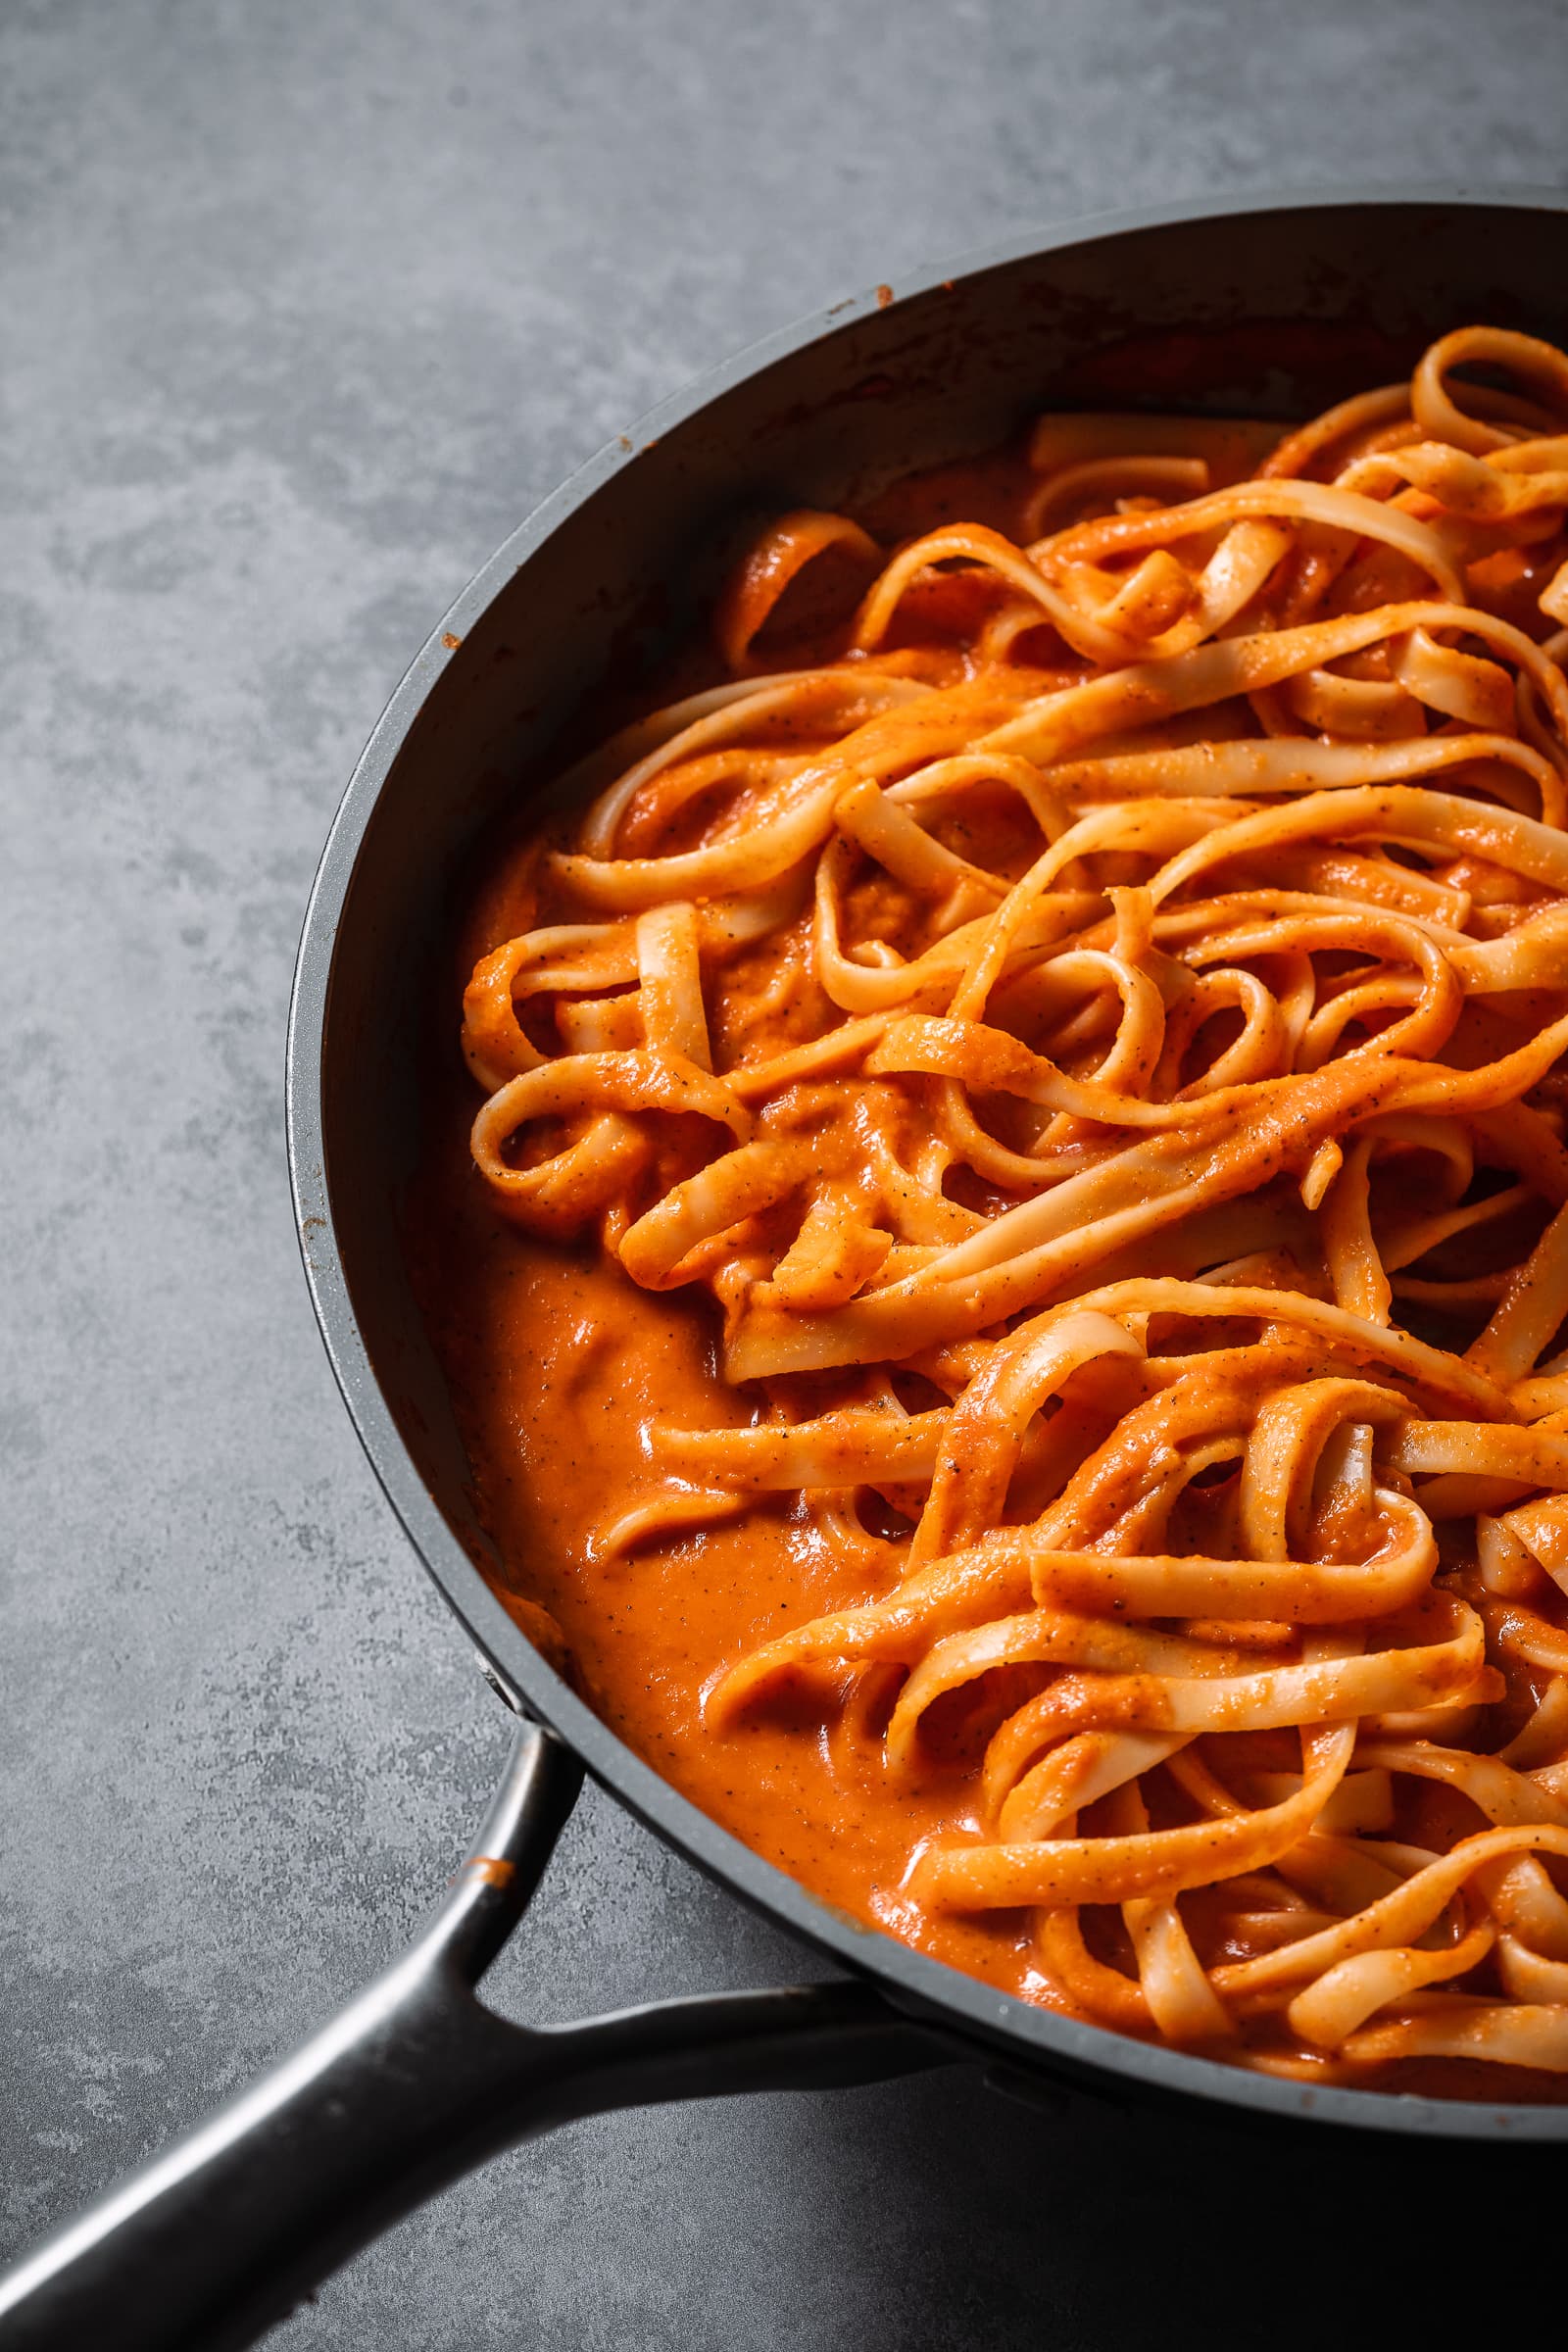 Fettuccine noodles tossed with roasted red pepper sauce.